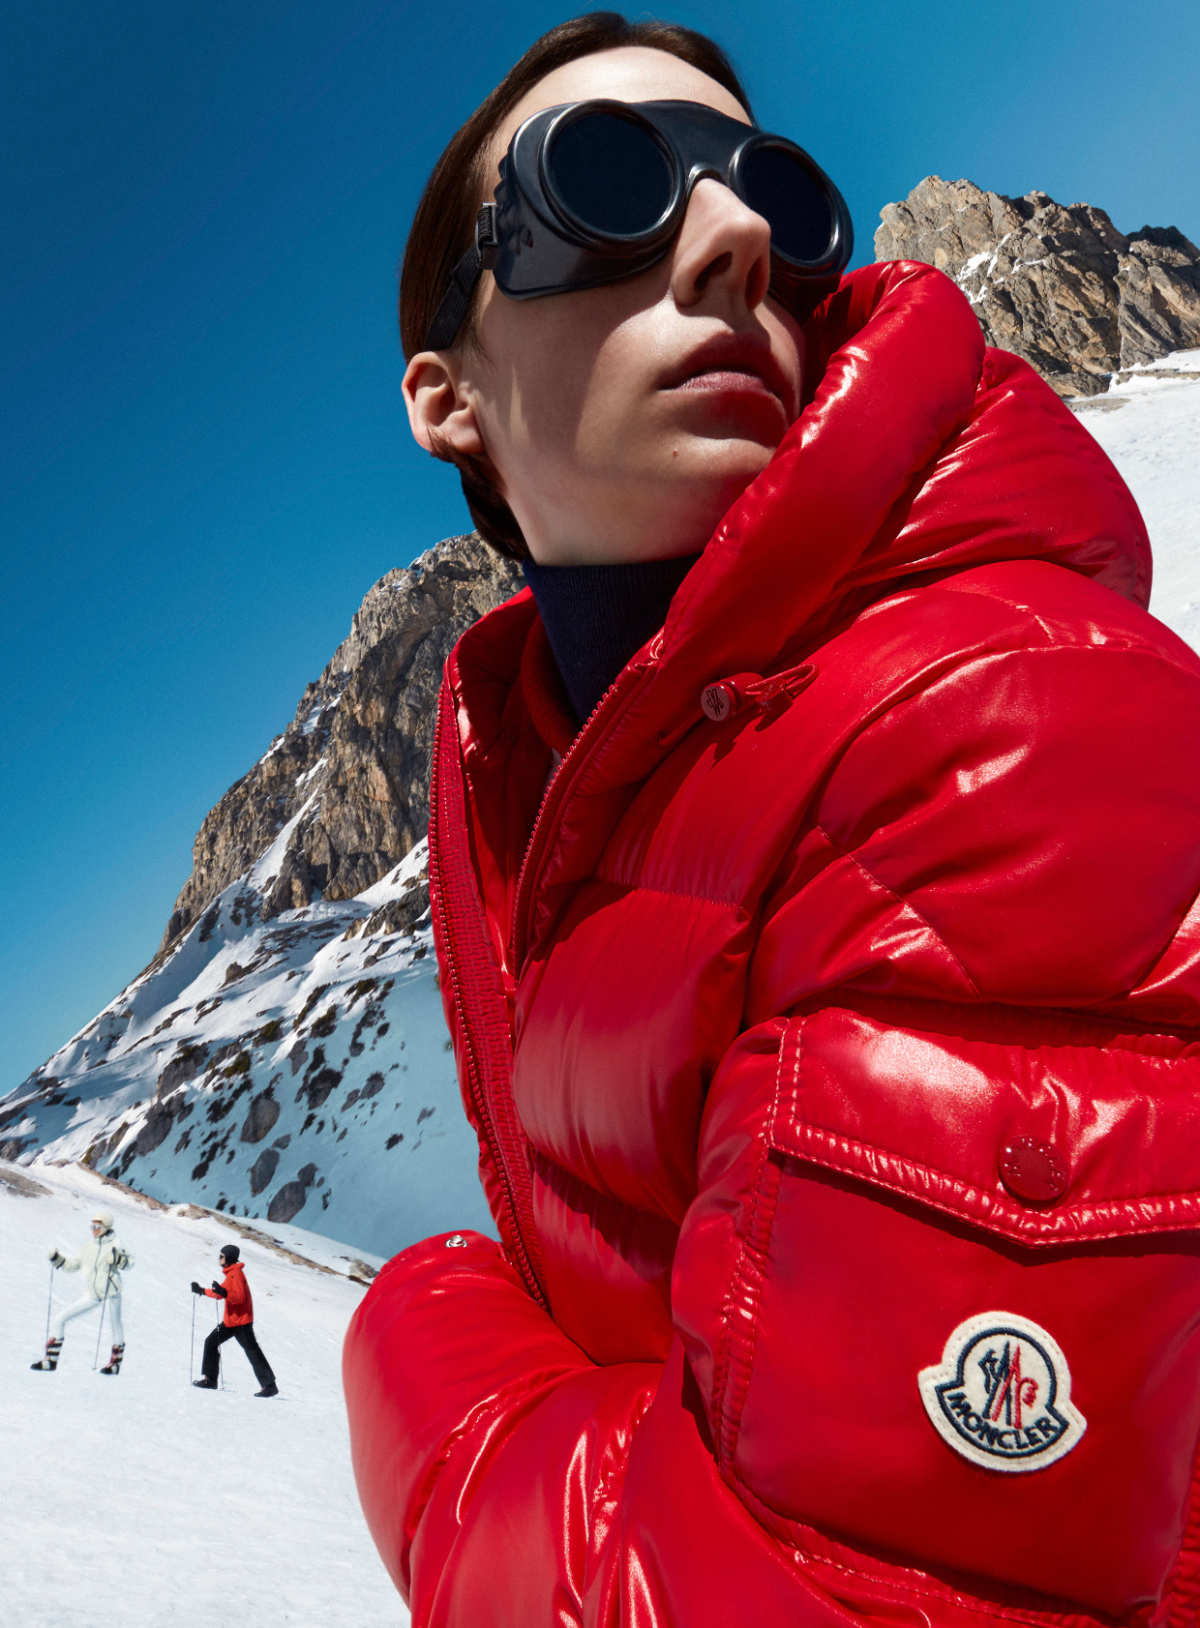 MONCLER EXTRAORDINARY FOREVER: From 1952 To 2022 And Beyond